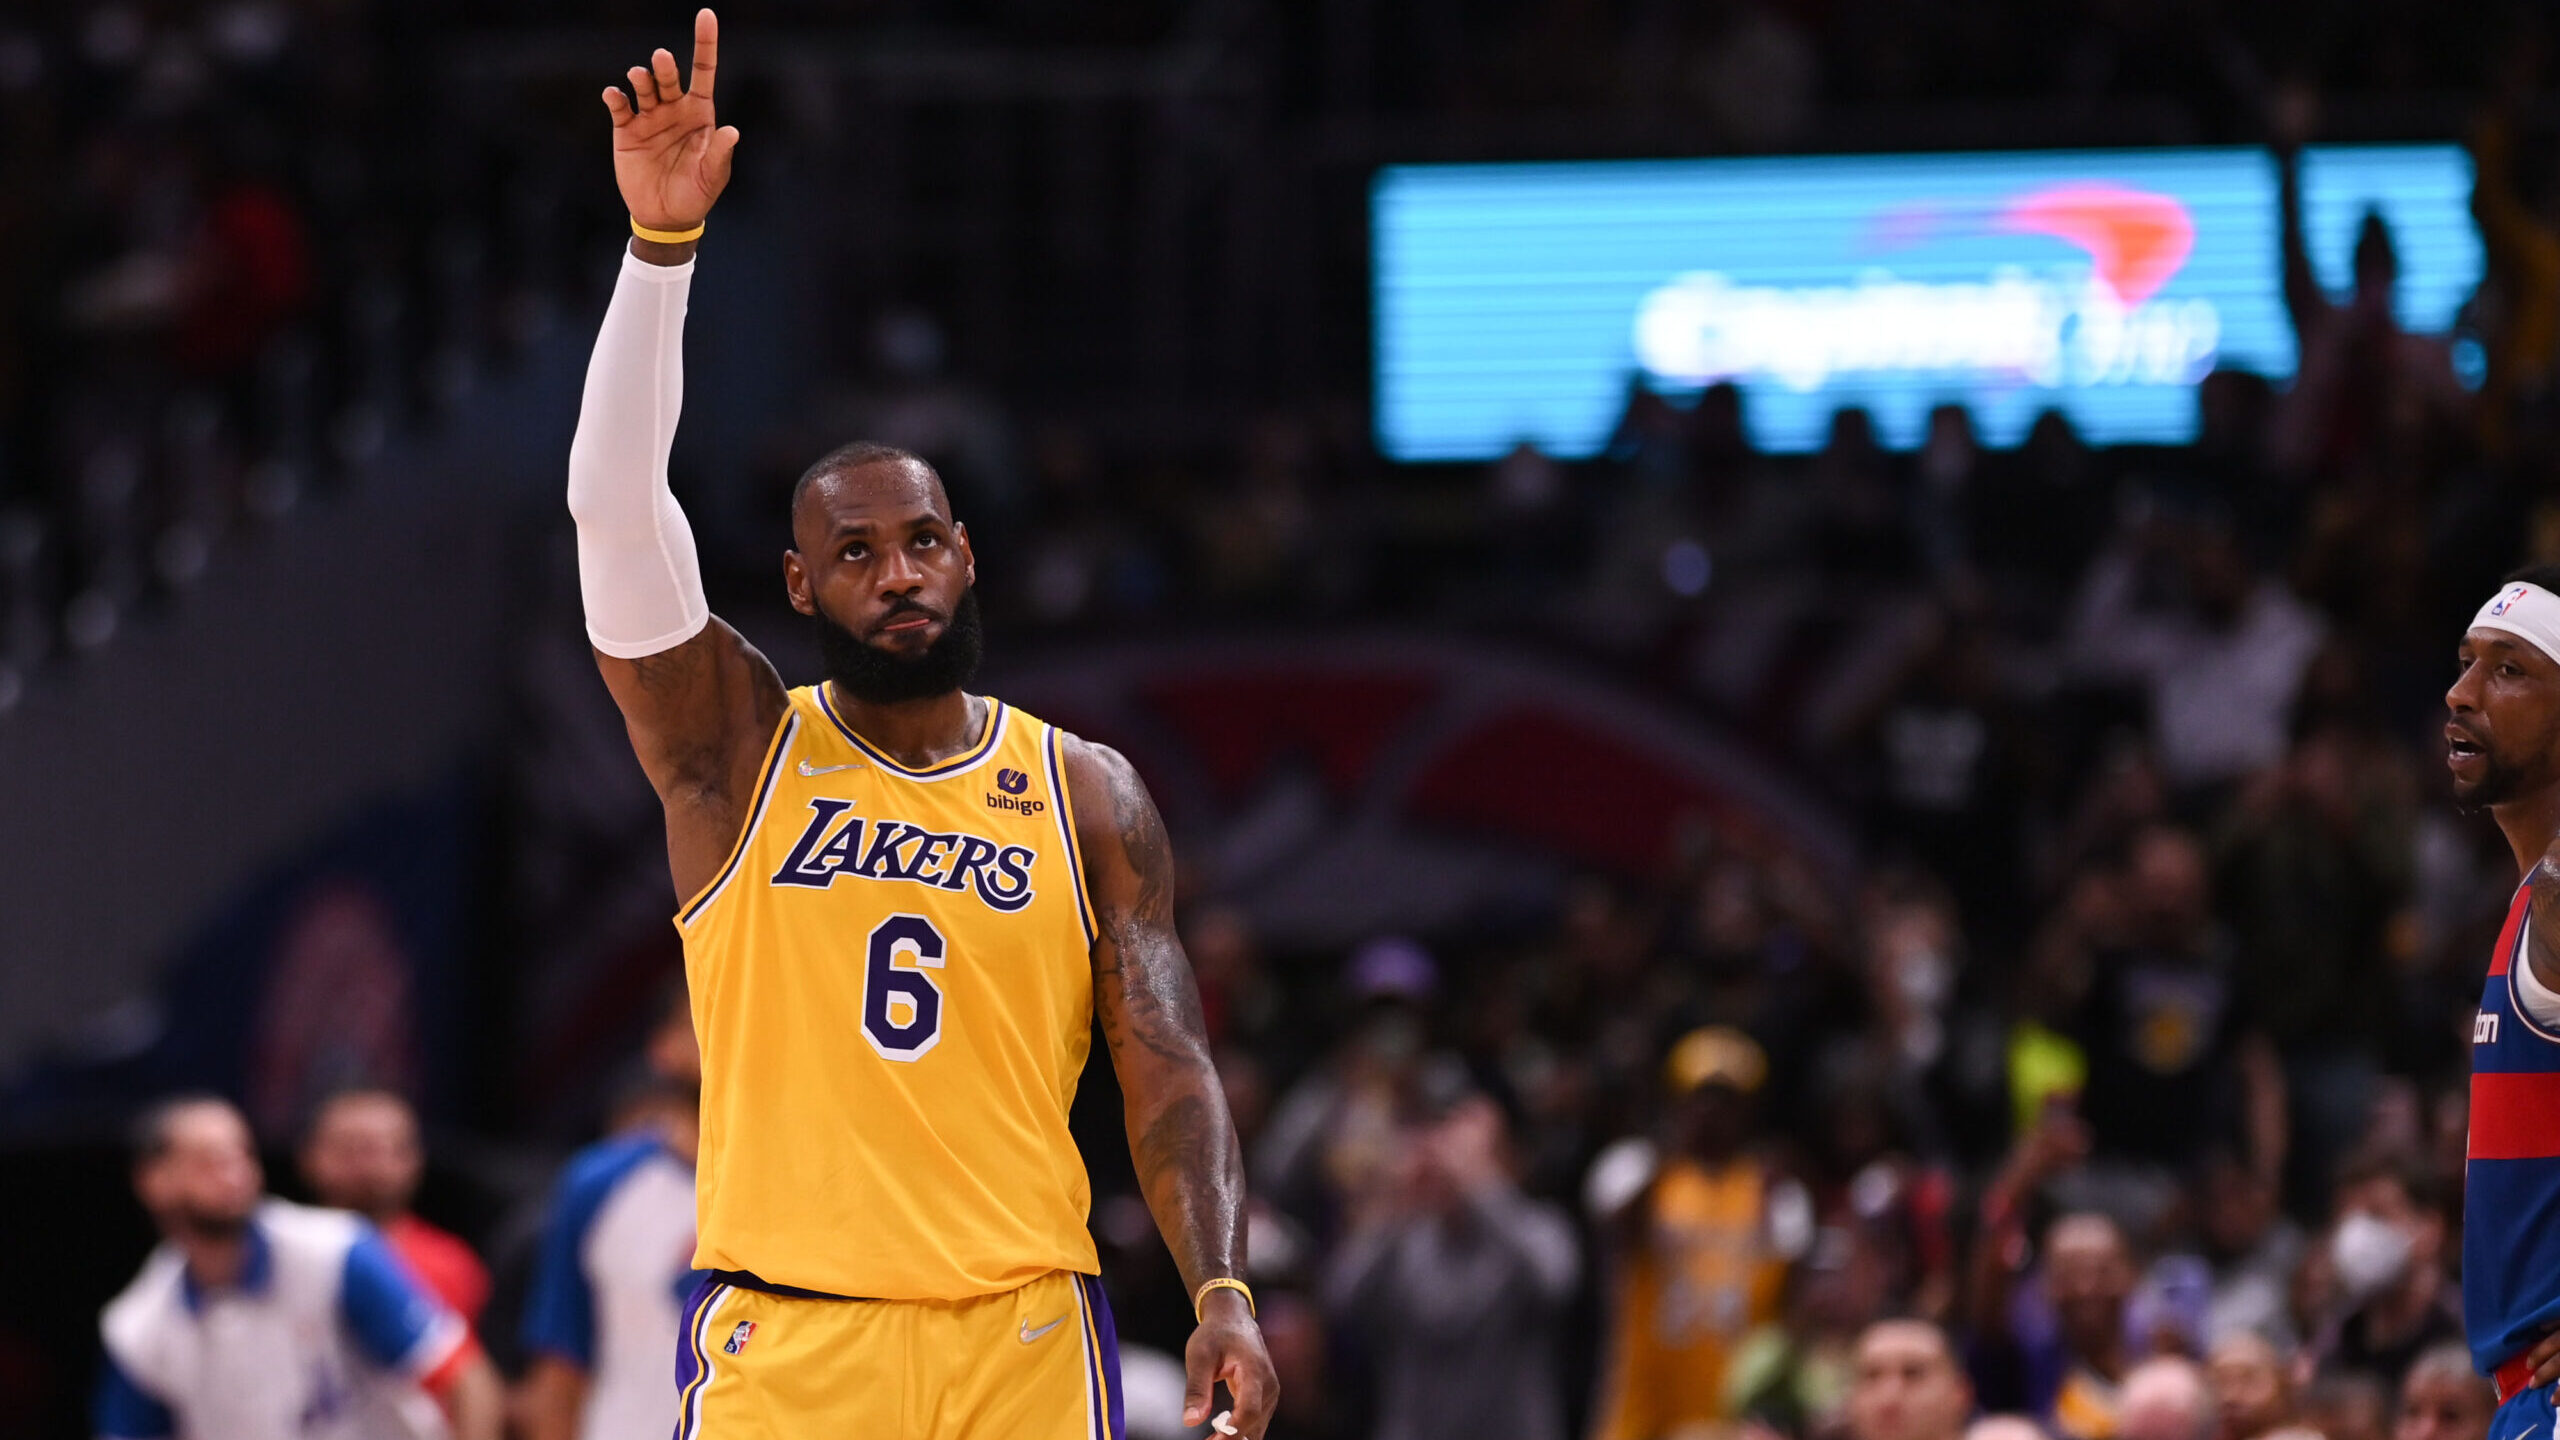 LeBron James Moves Past Karl Malone on the NBA's All-Time Scoring List